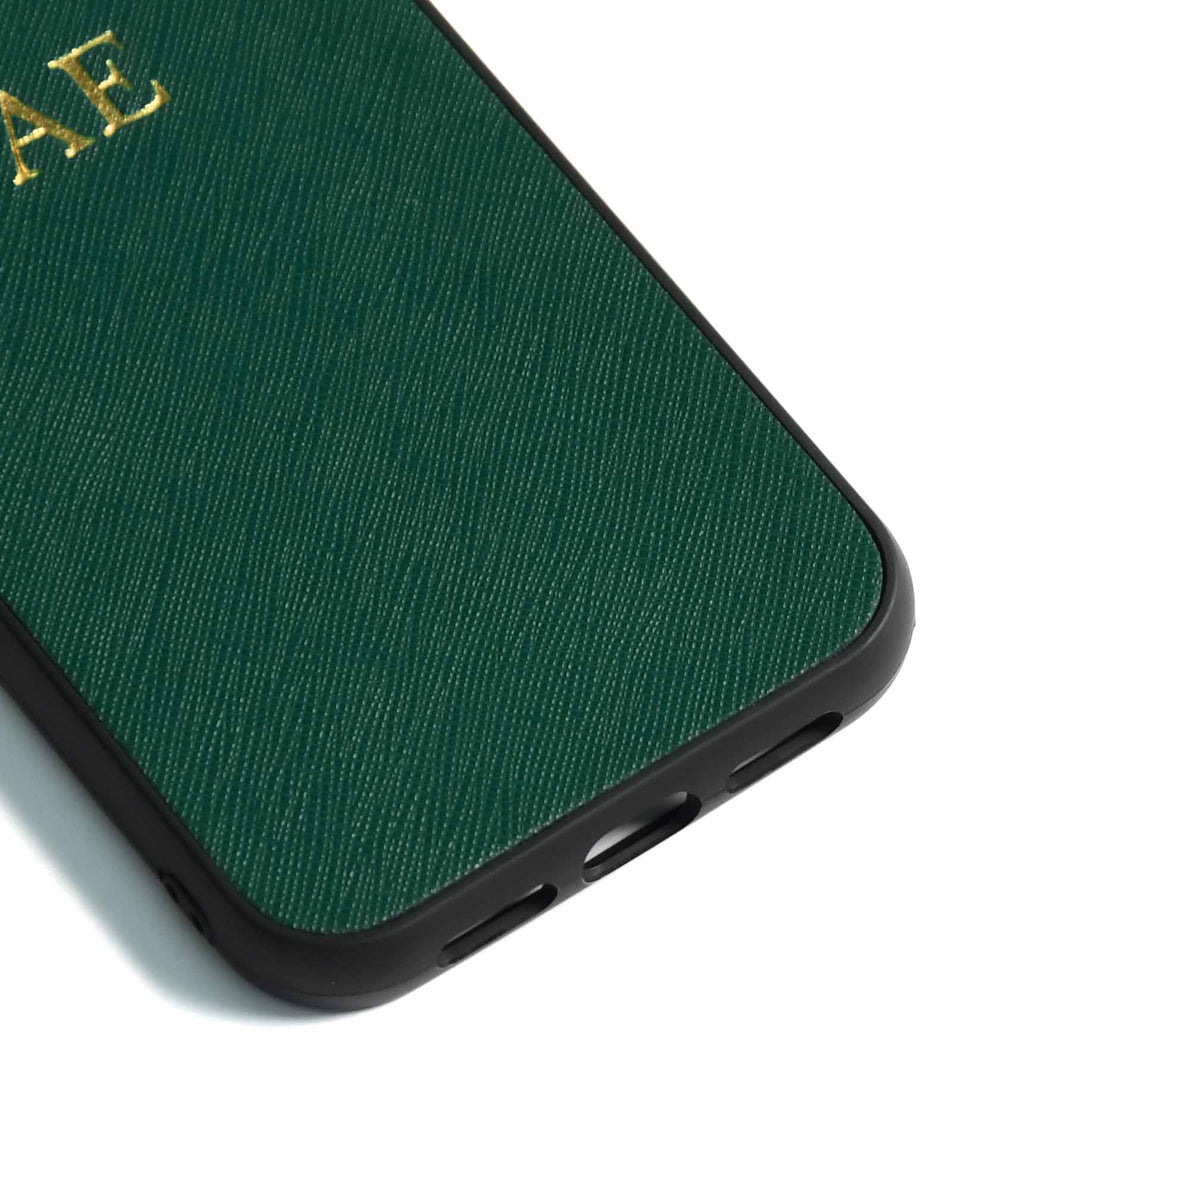 Samsung S21 - Forest Green - Personalizable